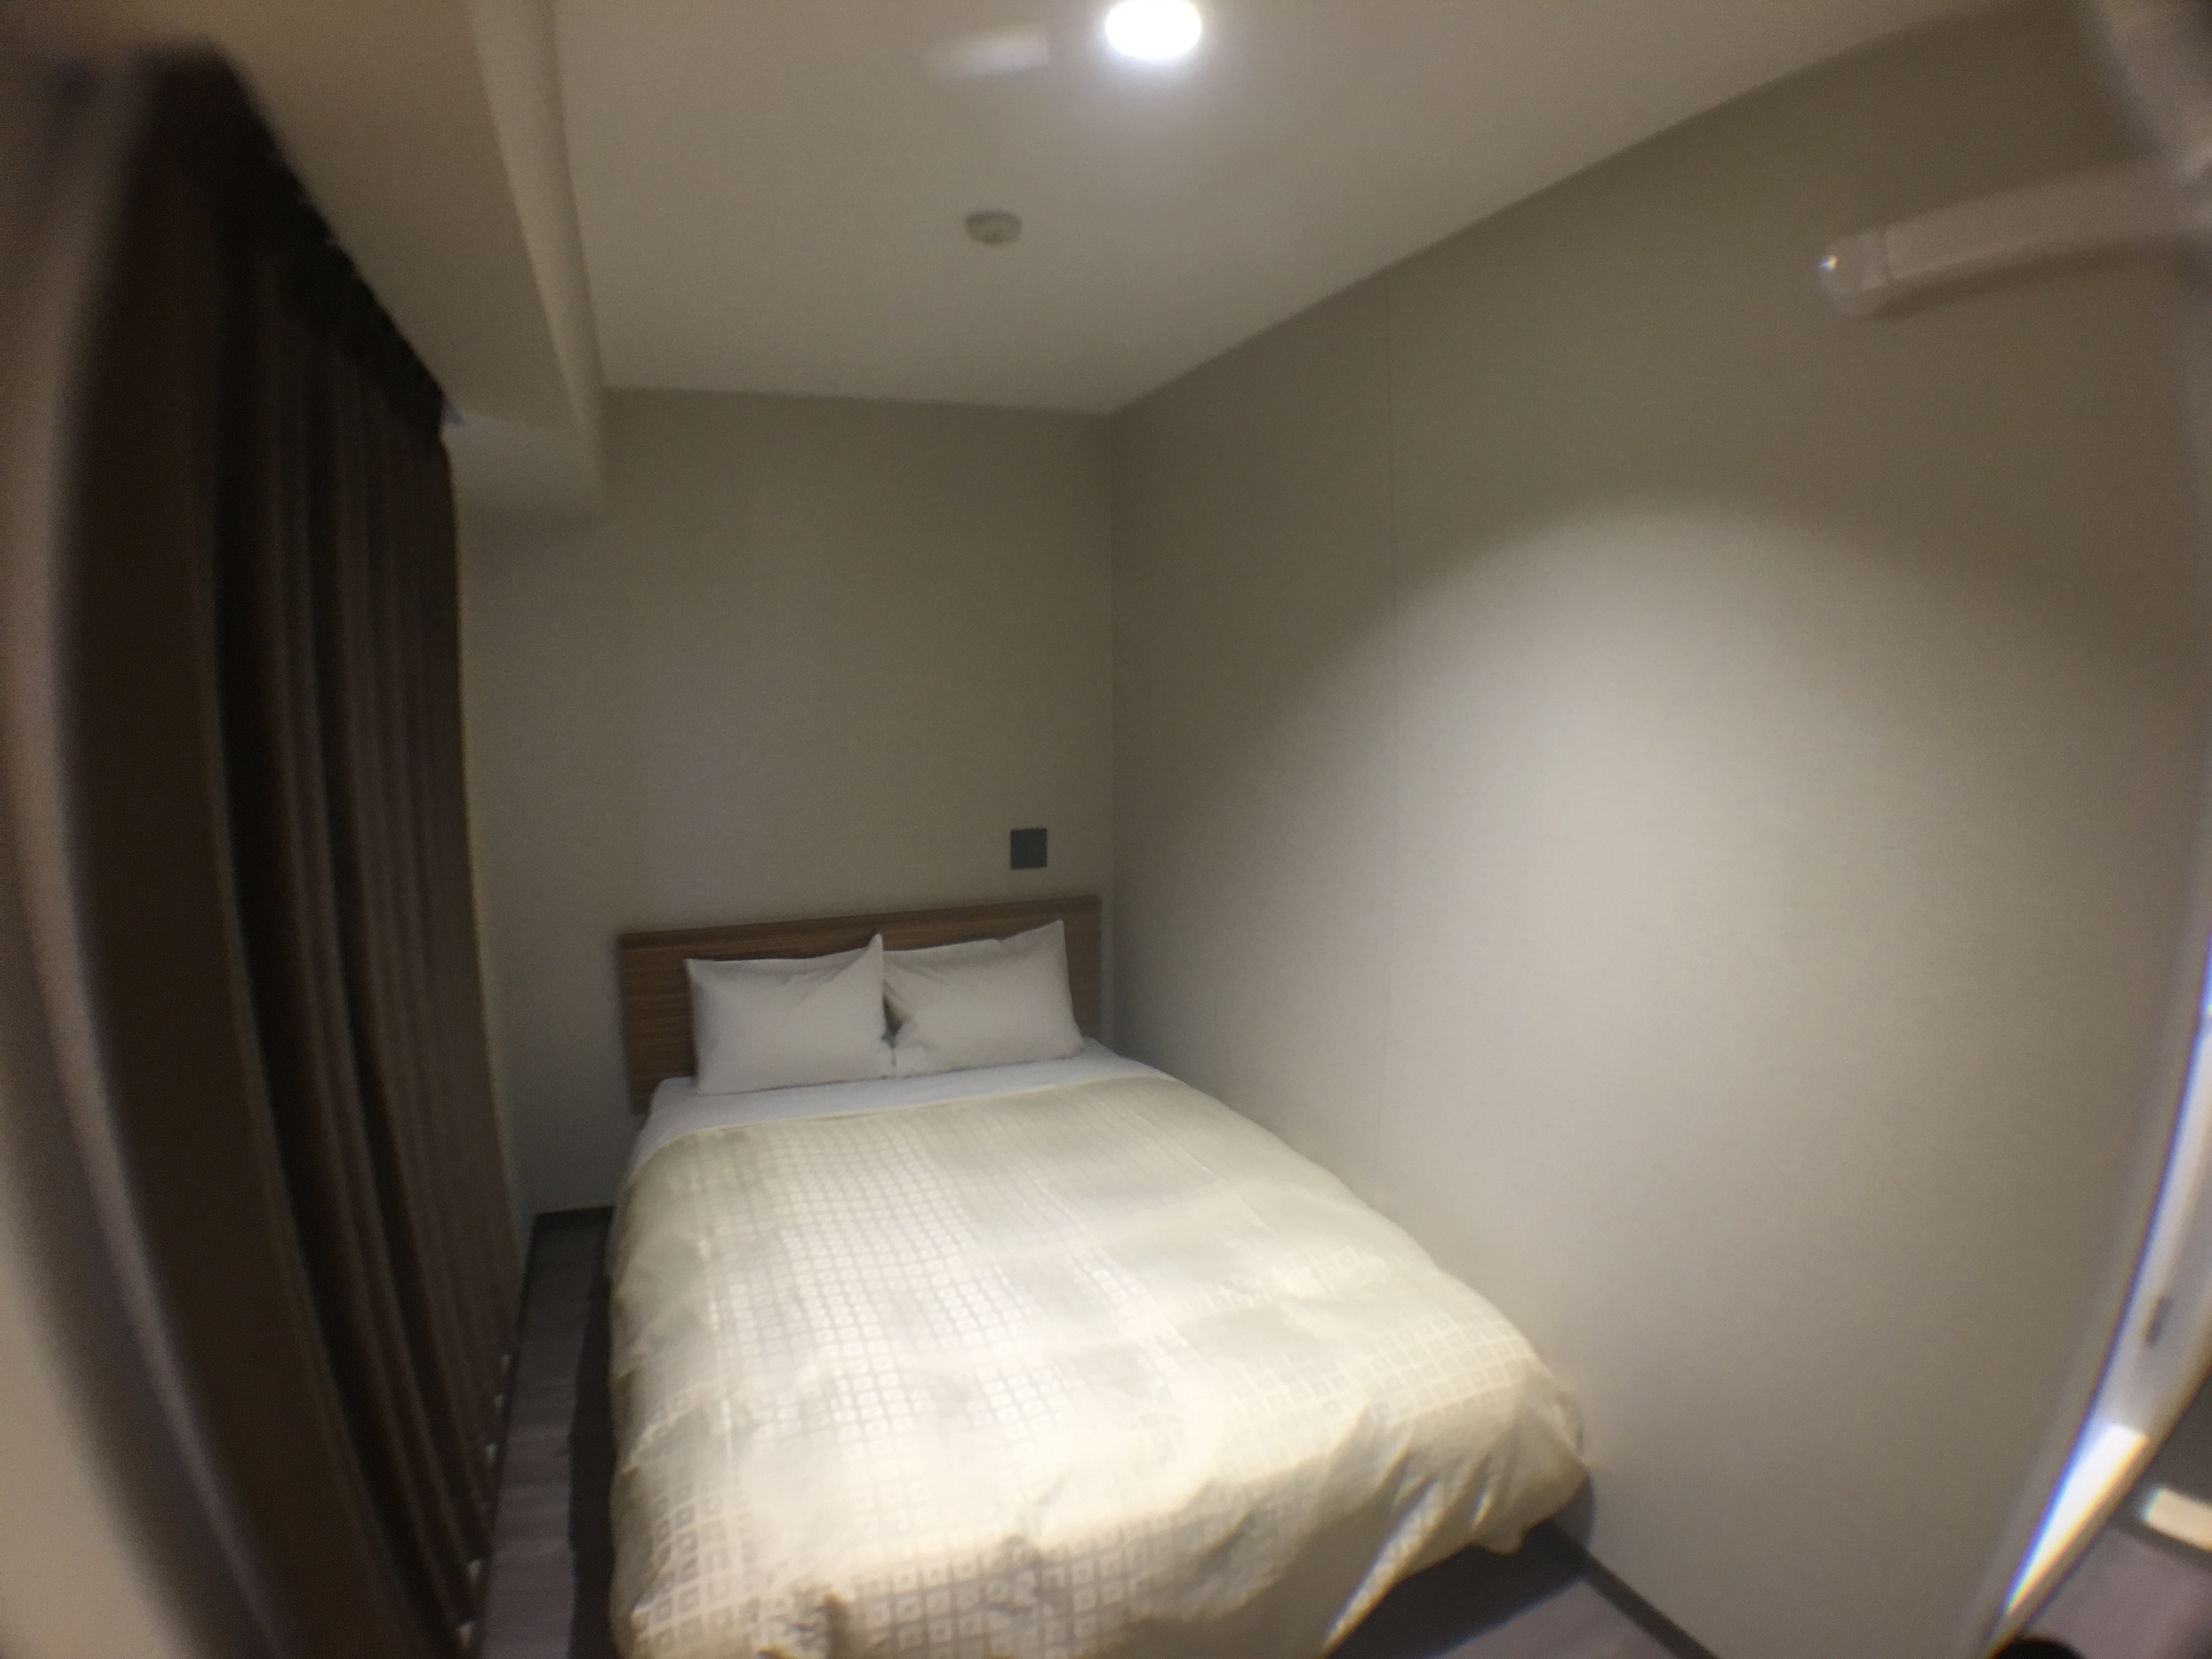 ☆ Semi-double room ☆ All rooms have 140 cm wide beds ♪